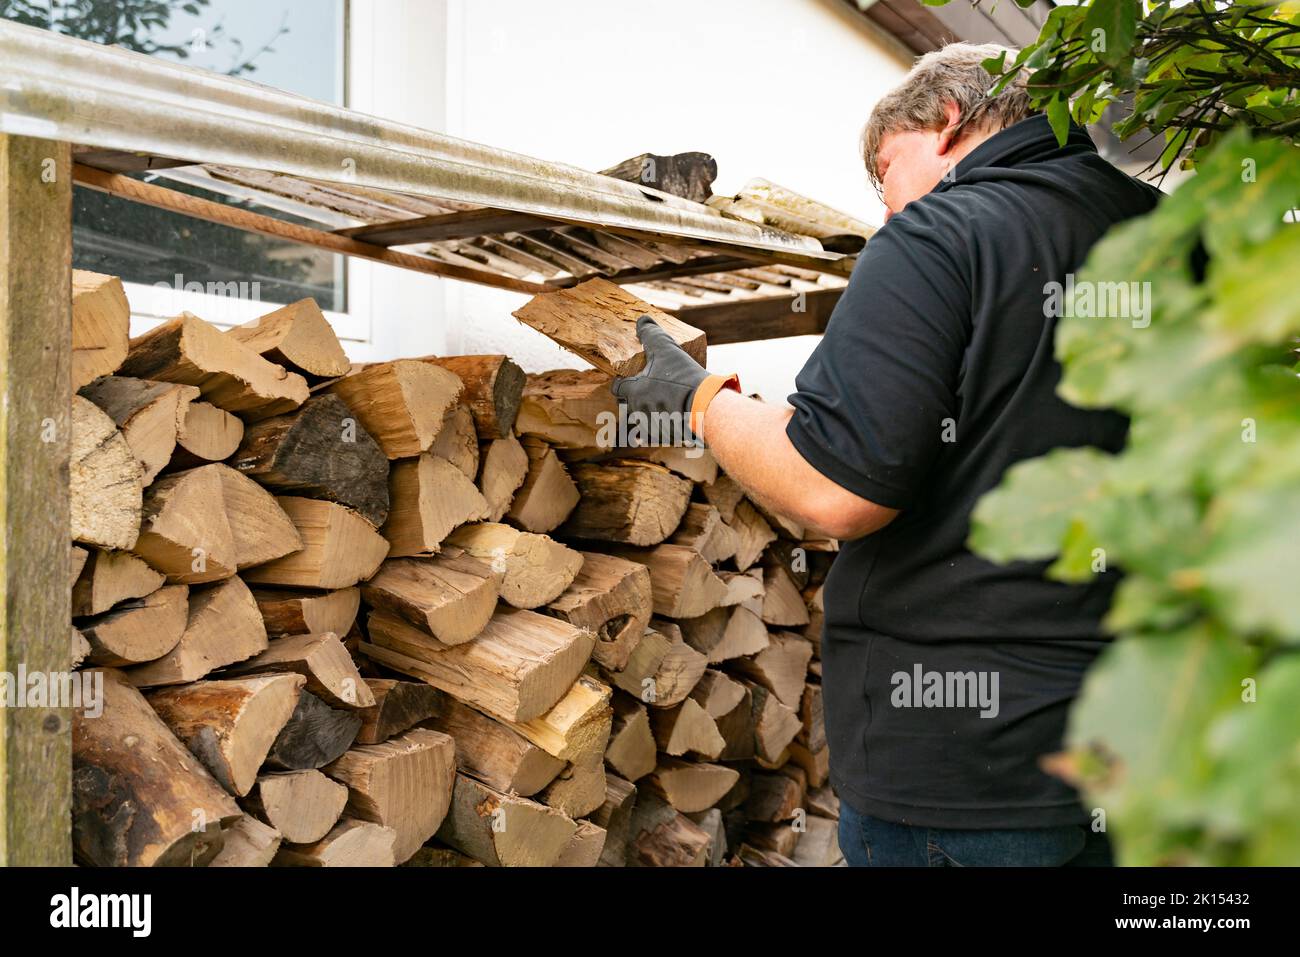 A 50 year old man has received a delivery of firewood and is putting the beech logs into the firewood rack. Outside the house, the rack is equipped wi Stock Photo